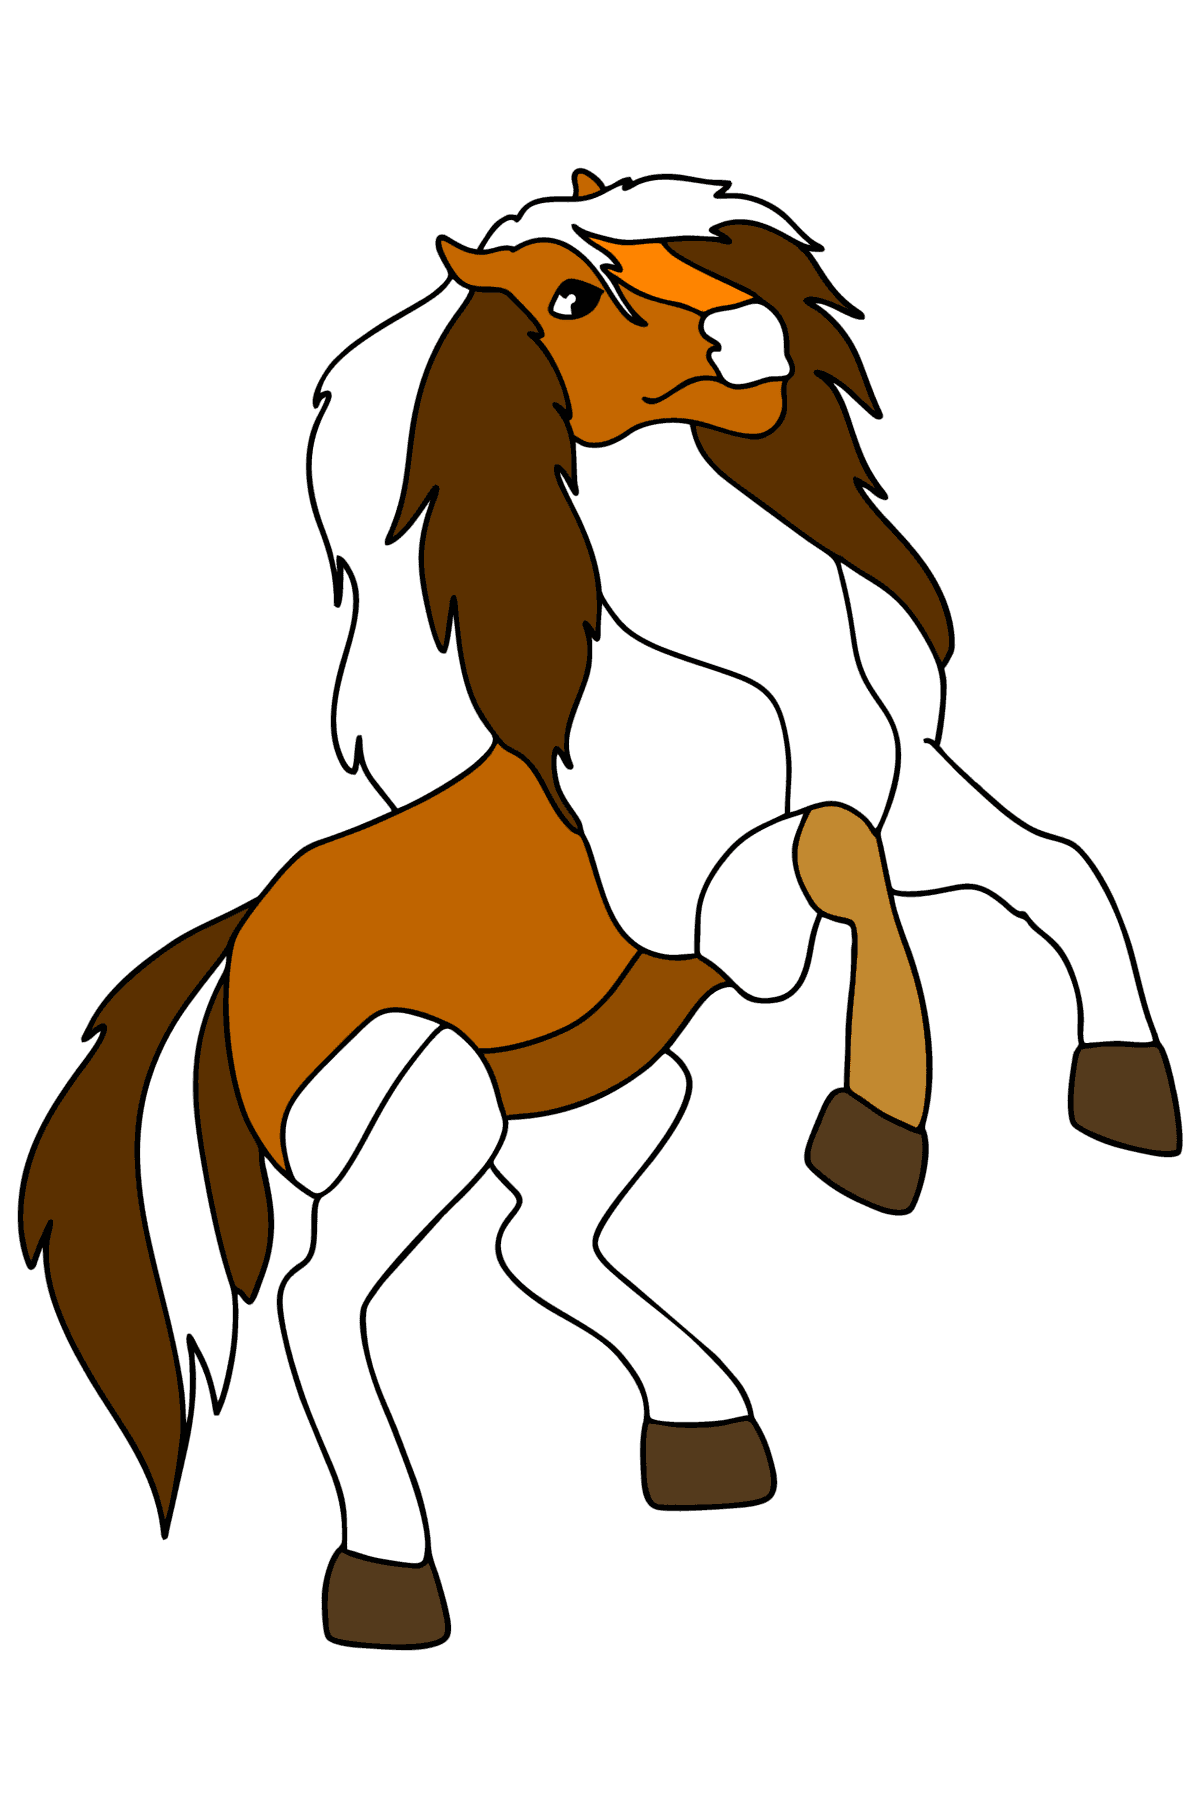 Young arab horse сoloring page - Coloring Pages for Kids